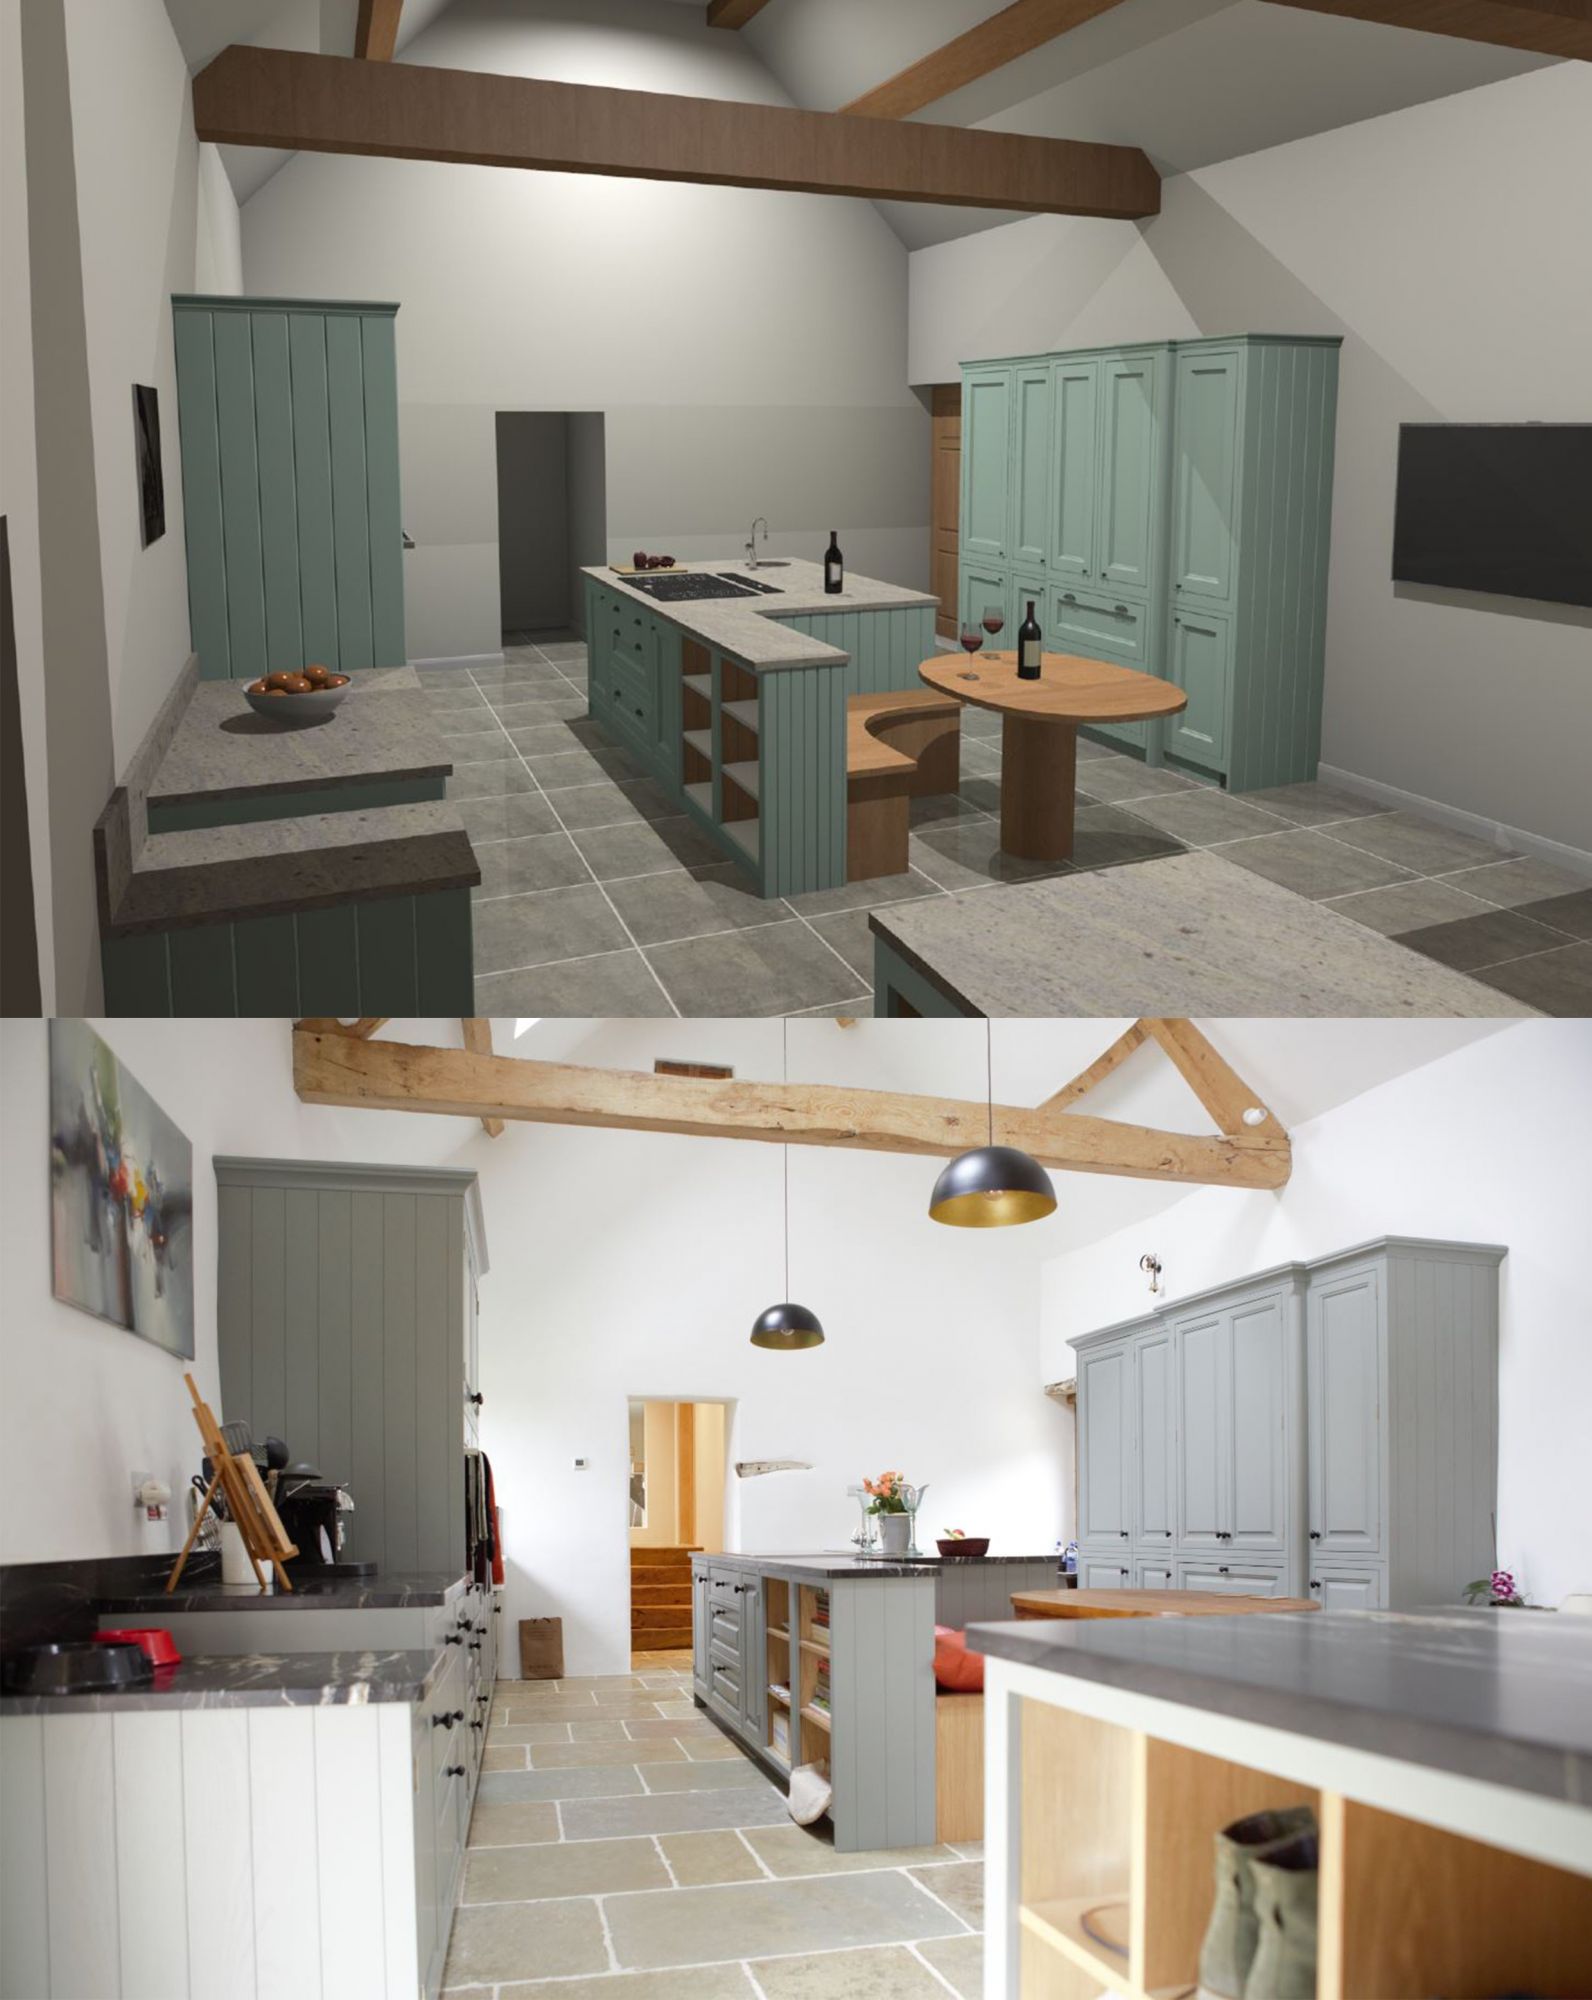 2 images of a kitchen 